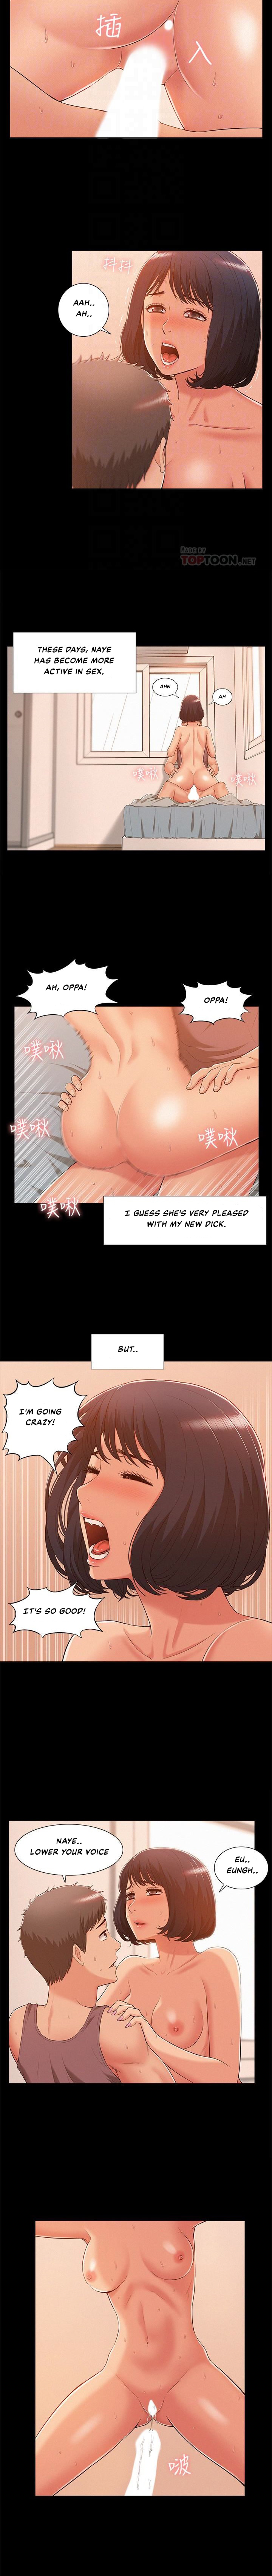 Your Situation - Chapter 7 Page 4